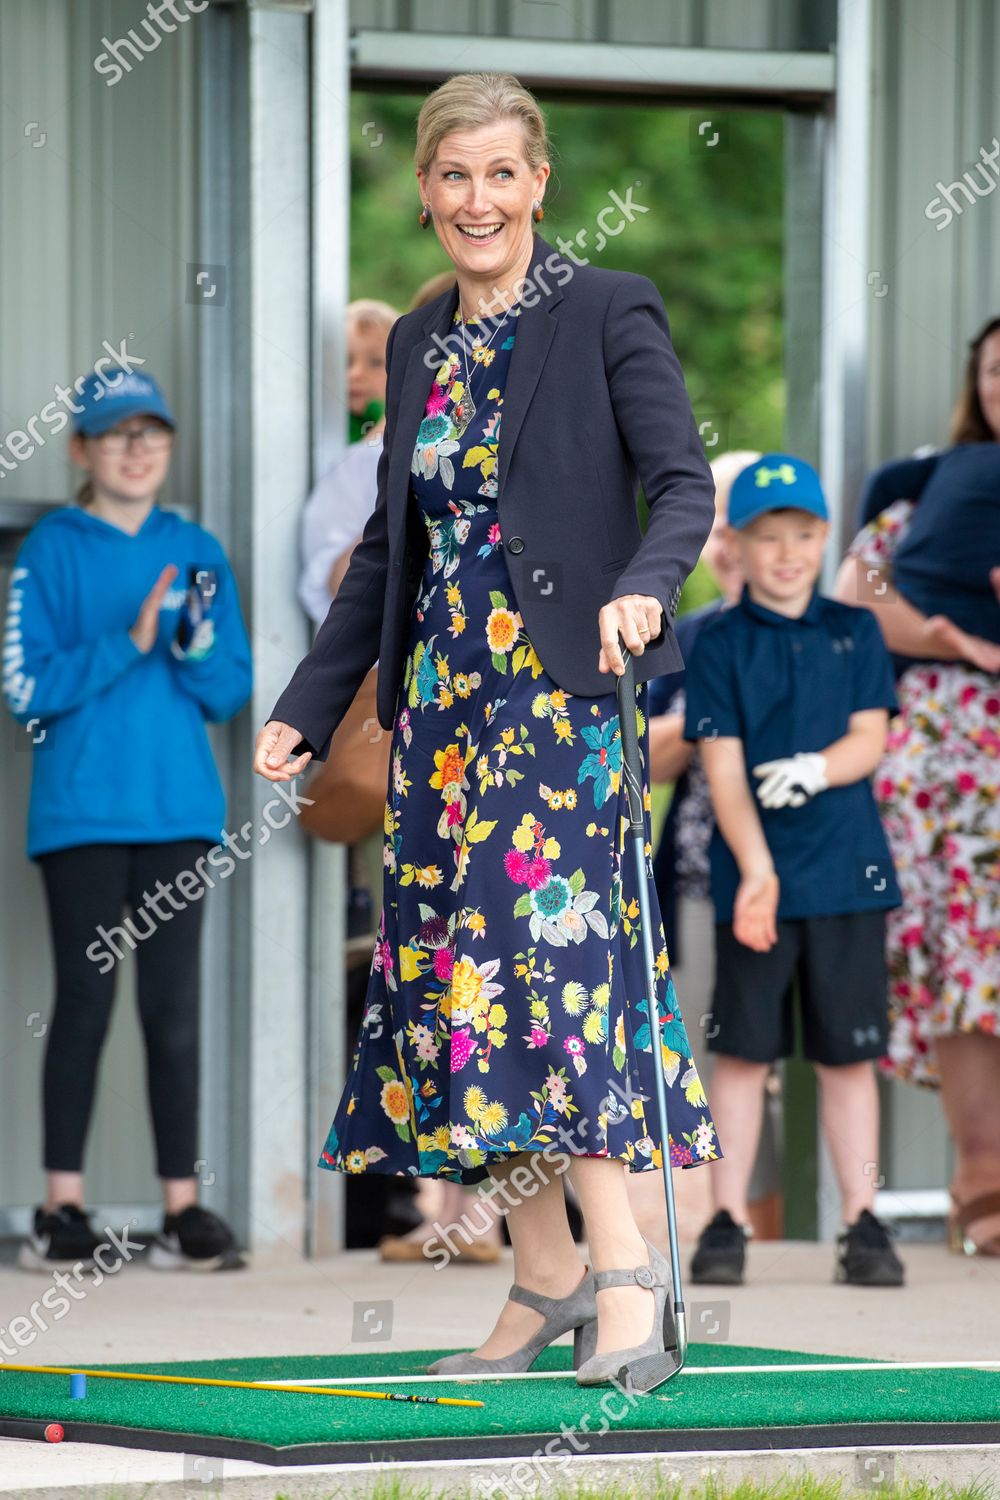 CASA REAL BRITÁNICA - Página 76 Prince-edward-and-sophie-countess-of-wessex-visit-to-forfar-golf-club-scotland-uk-shutterstock-editorial-12172307be